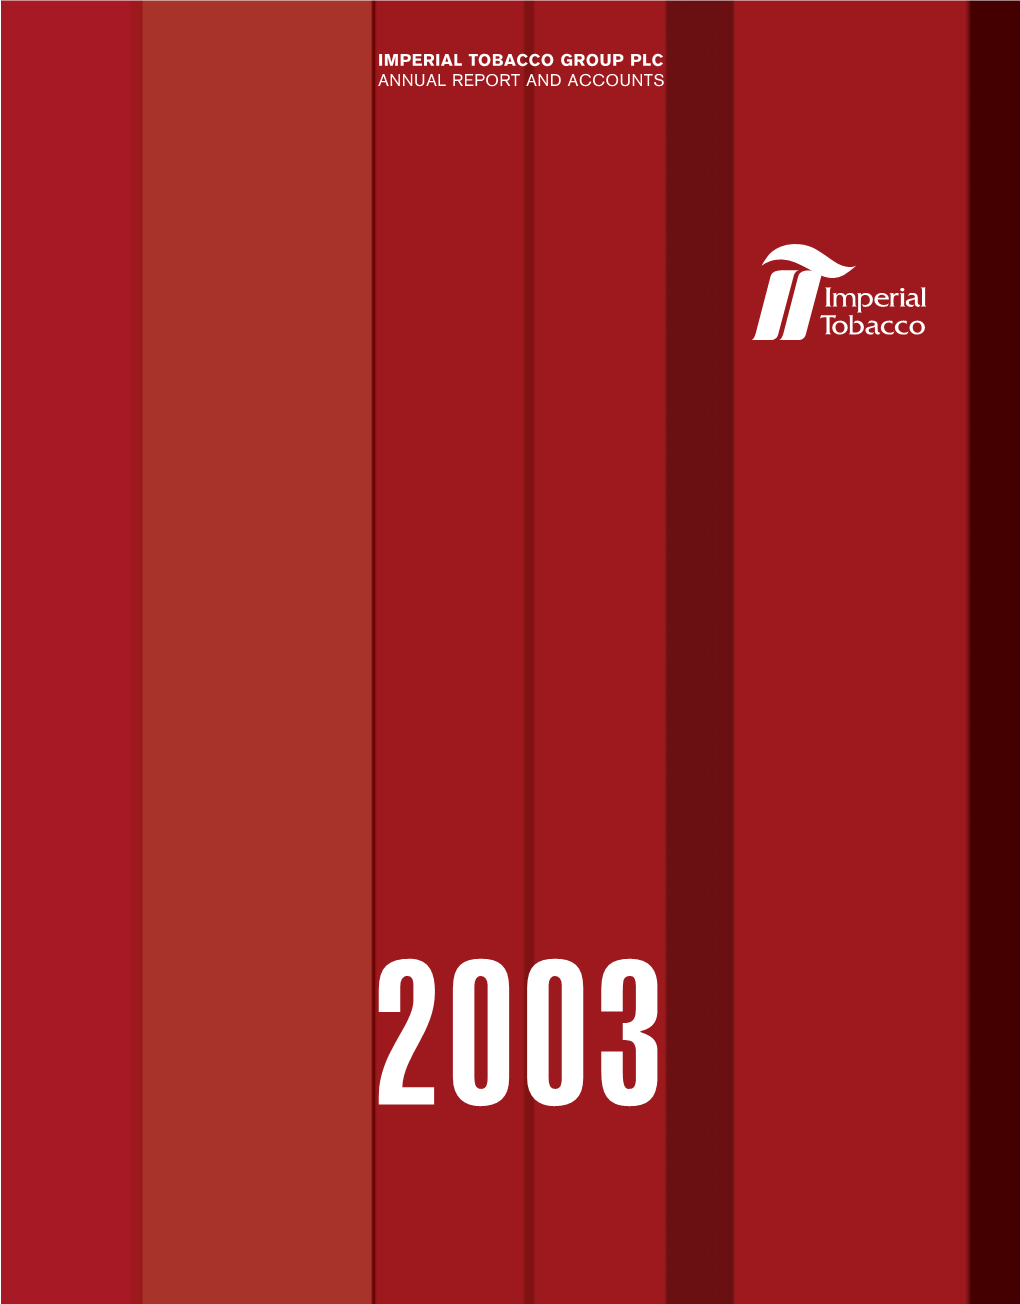 Imperial Tobacco Group Plc Annual Report and Accounts